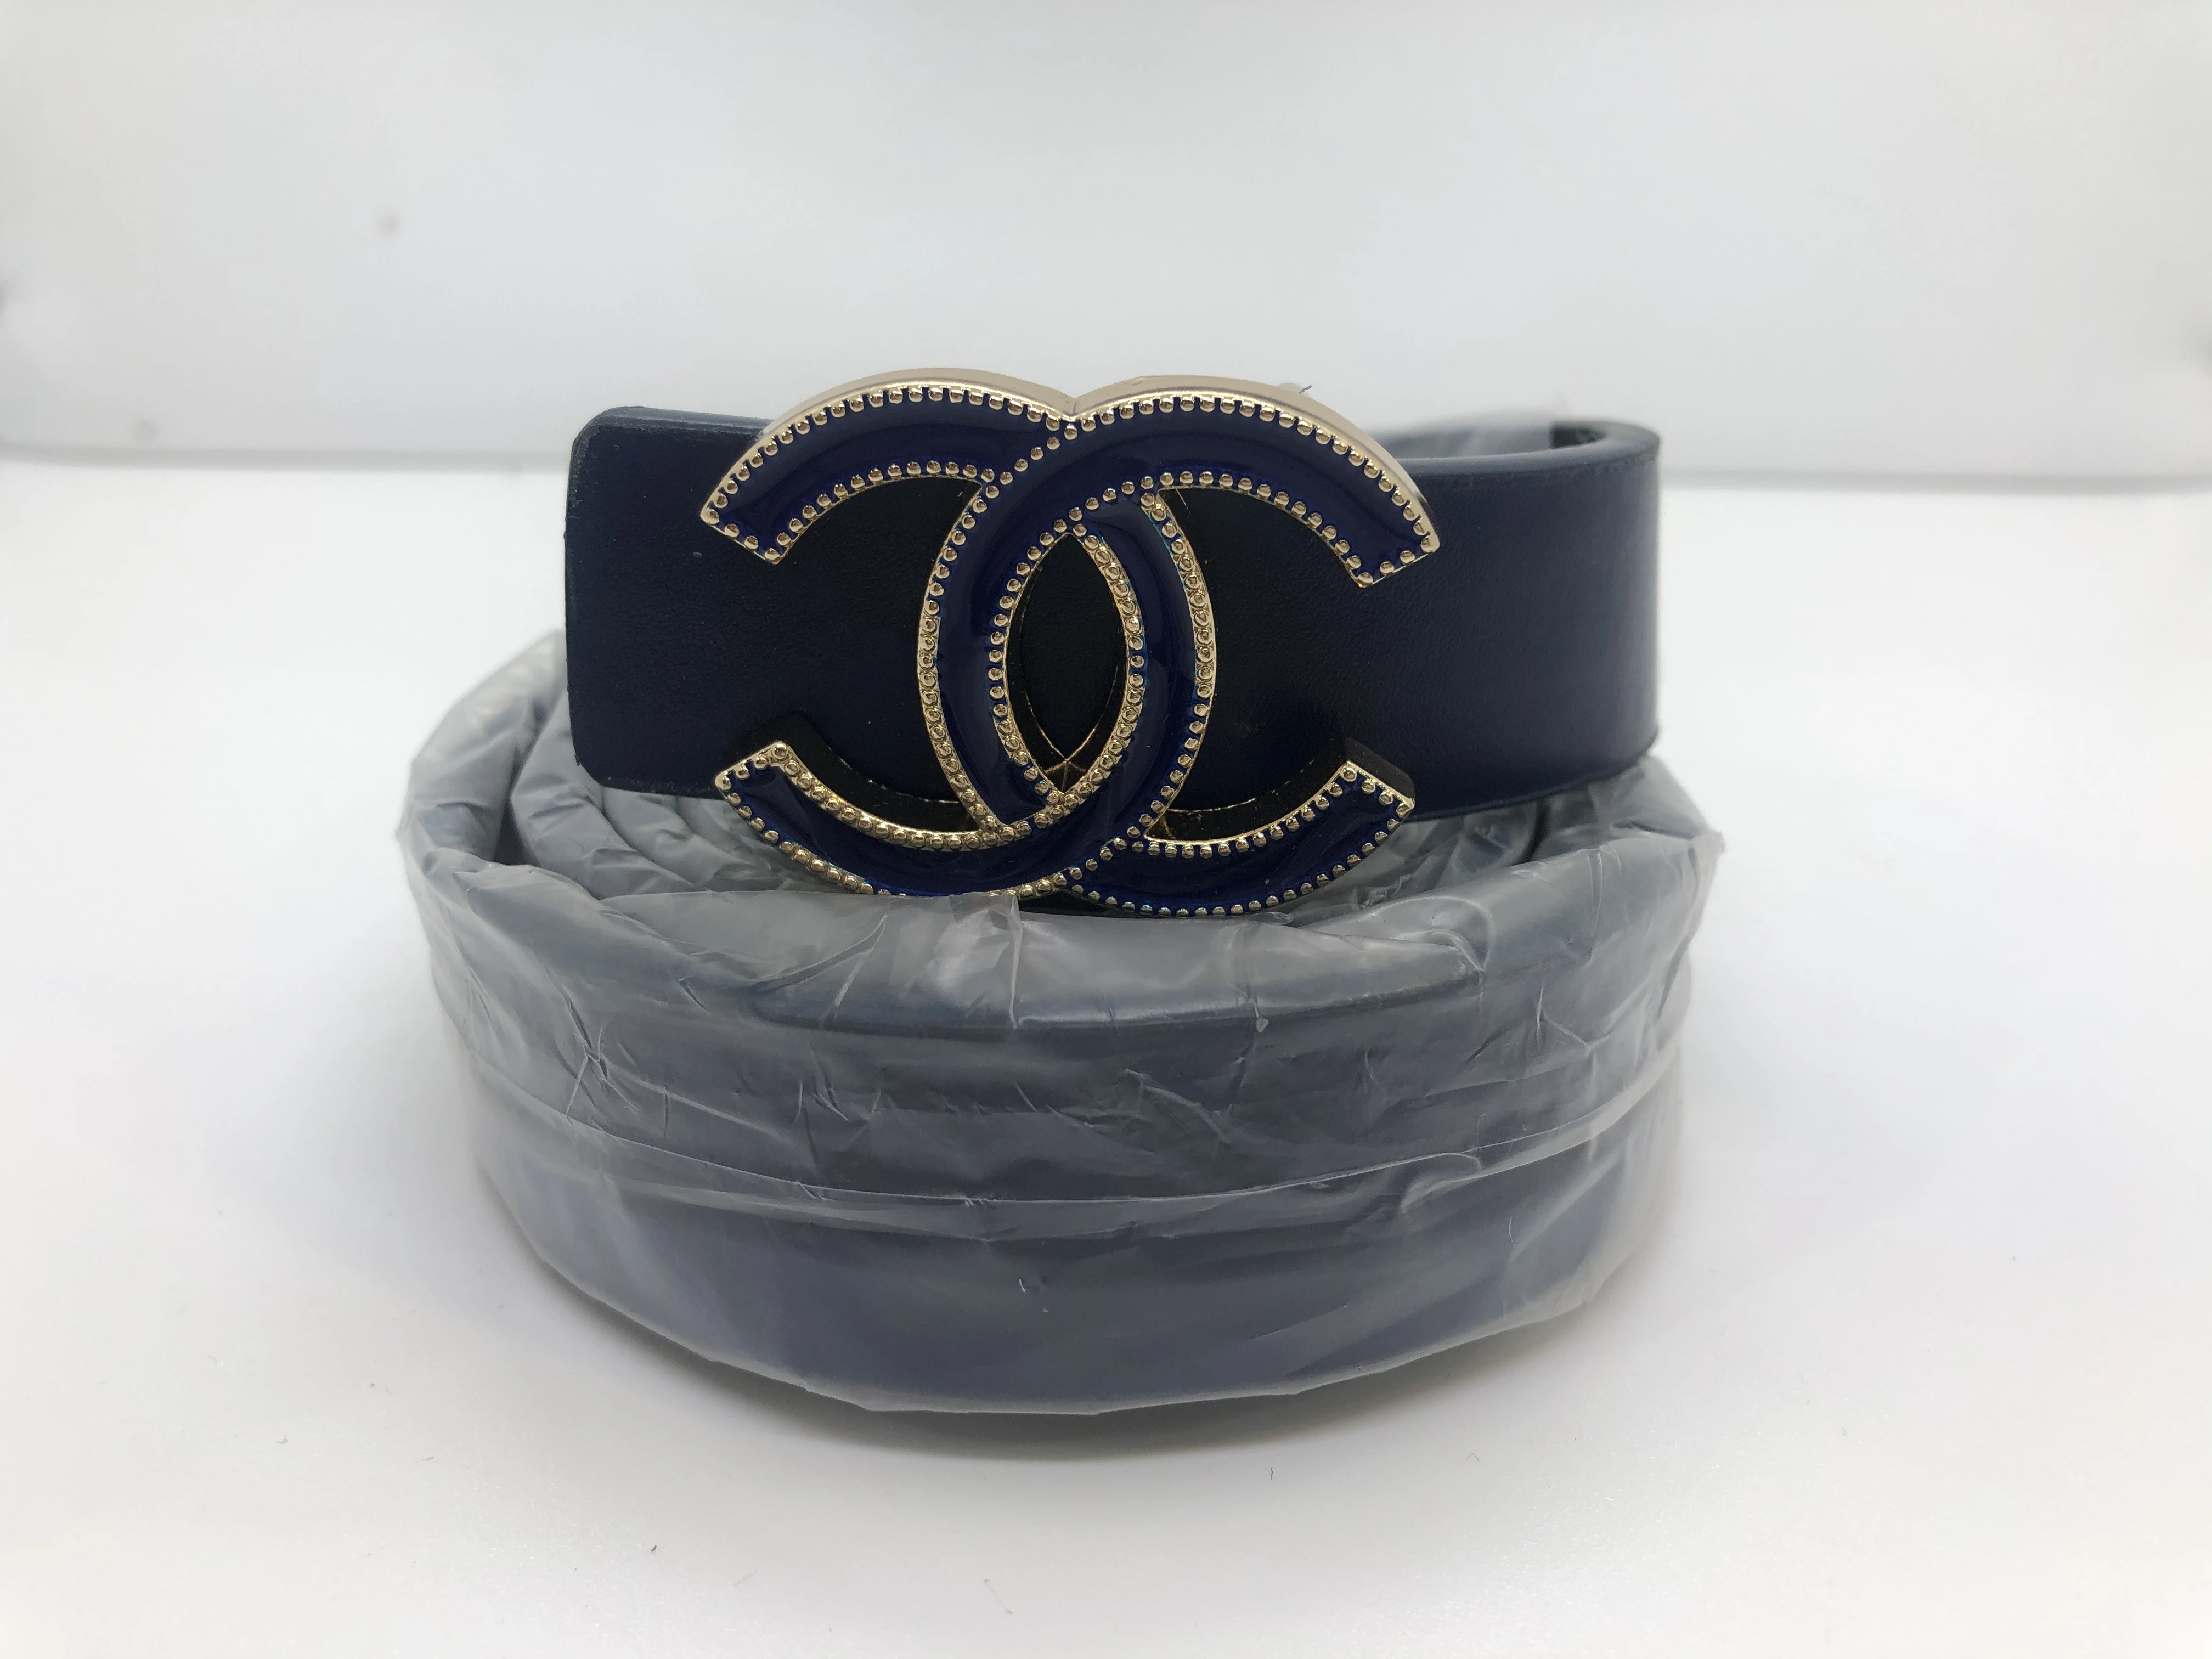 Gucci women's belt in navy blue Buckle navy green, finished with the brand's logo